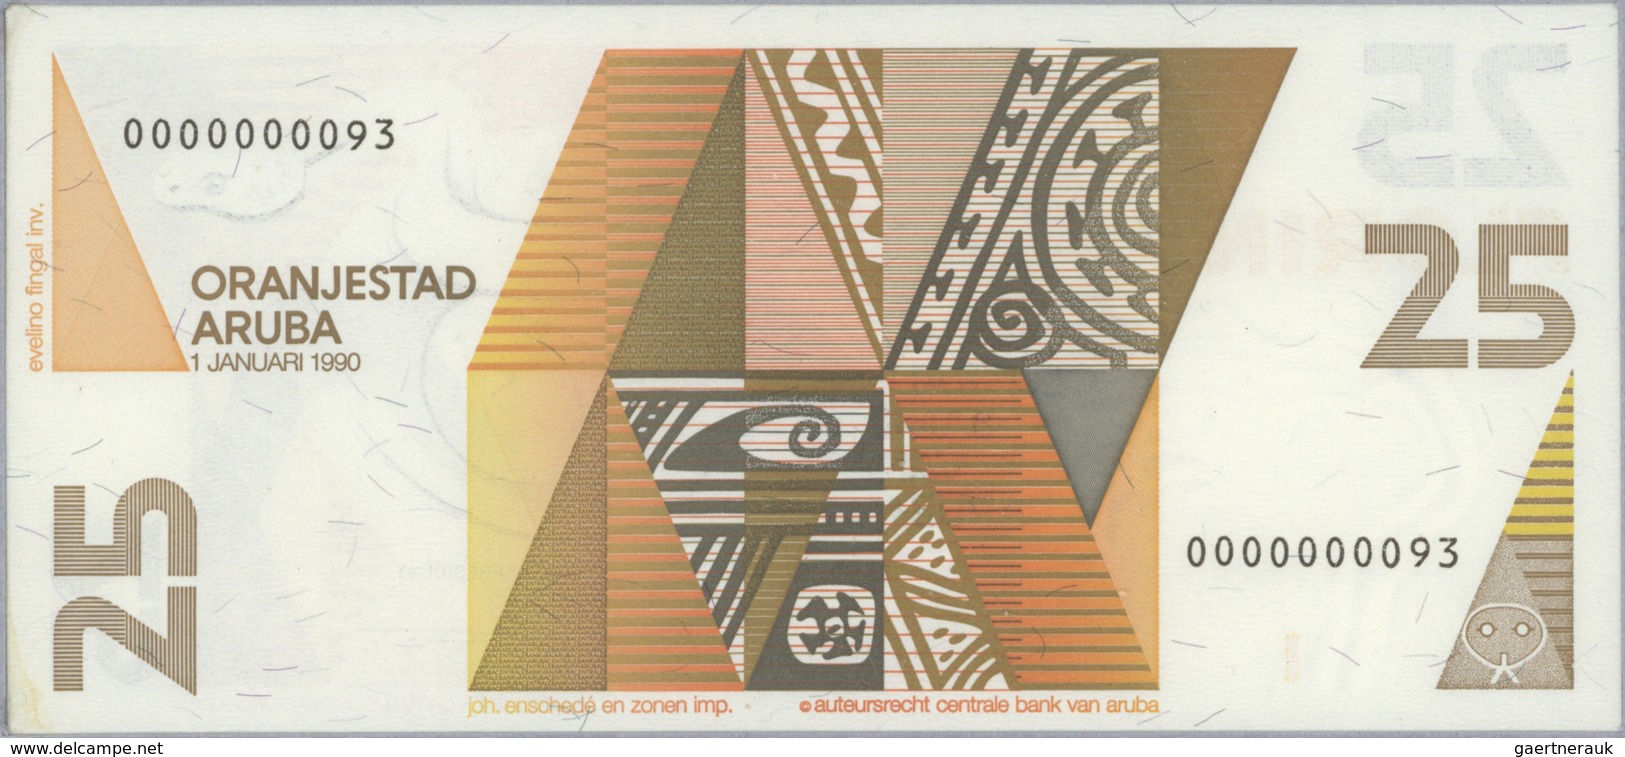 Aruba: official collectors book issued by the Central Bank of Aruba commemorating the first Banknote